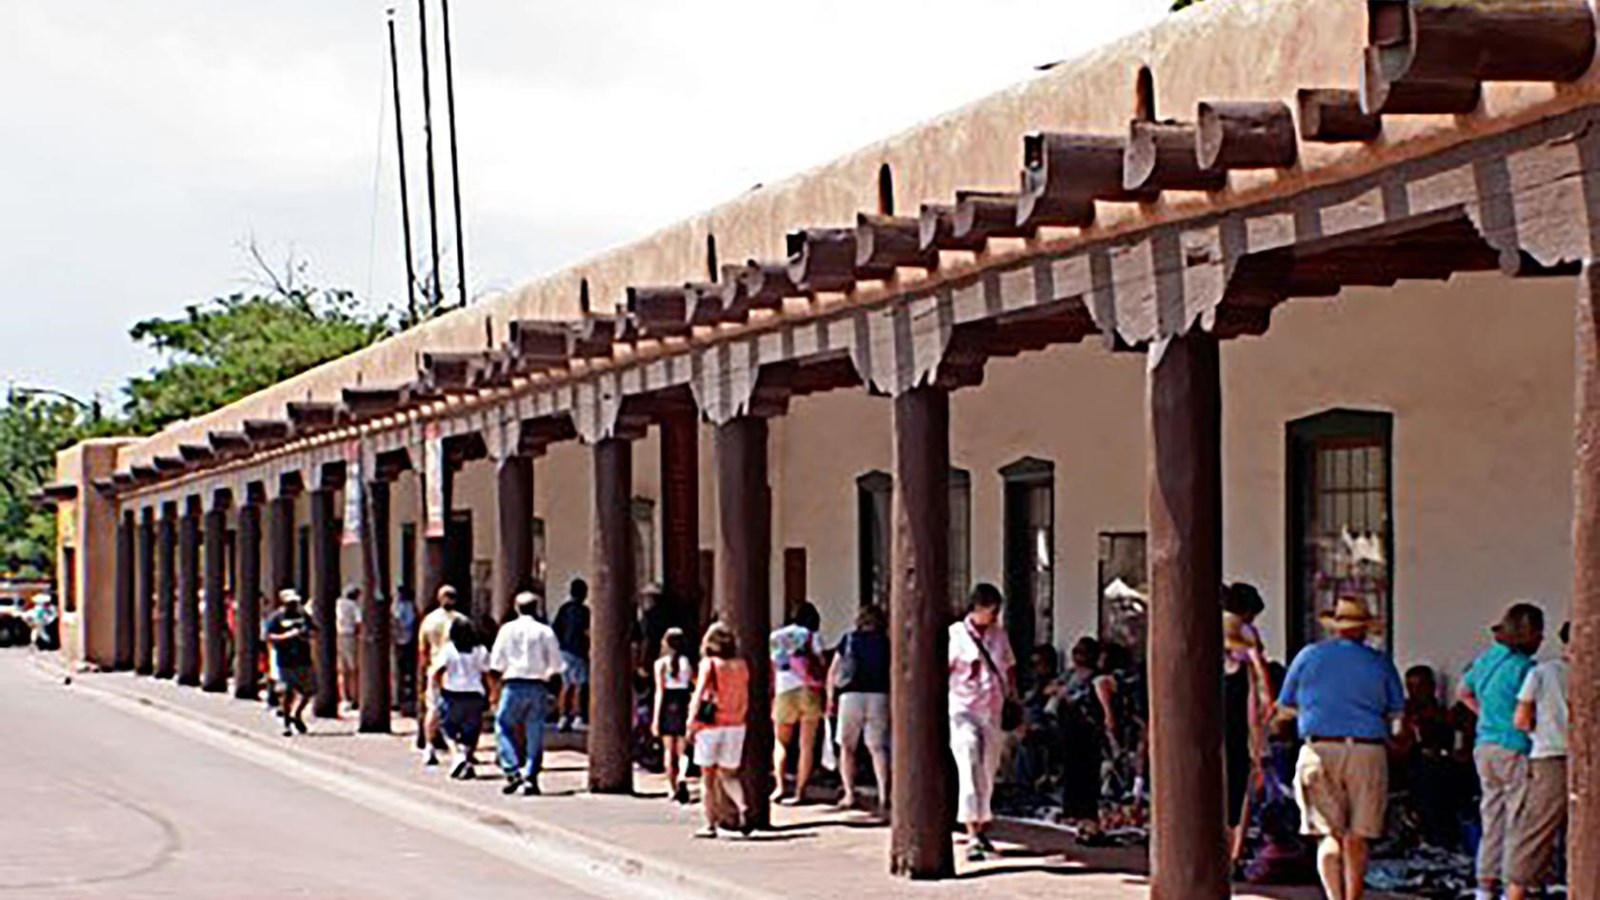 A one story adobe building with people walking under the covered hacienda.